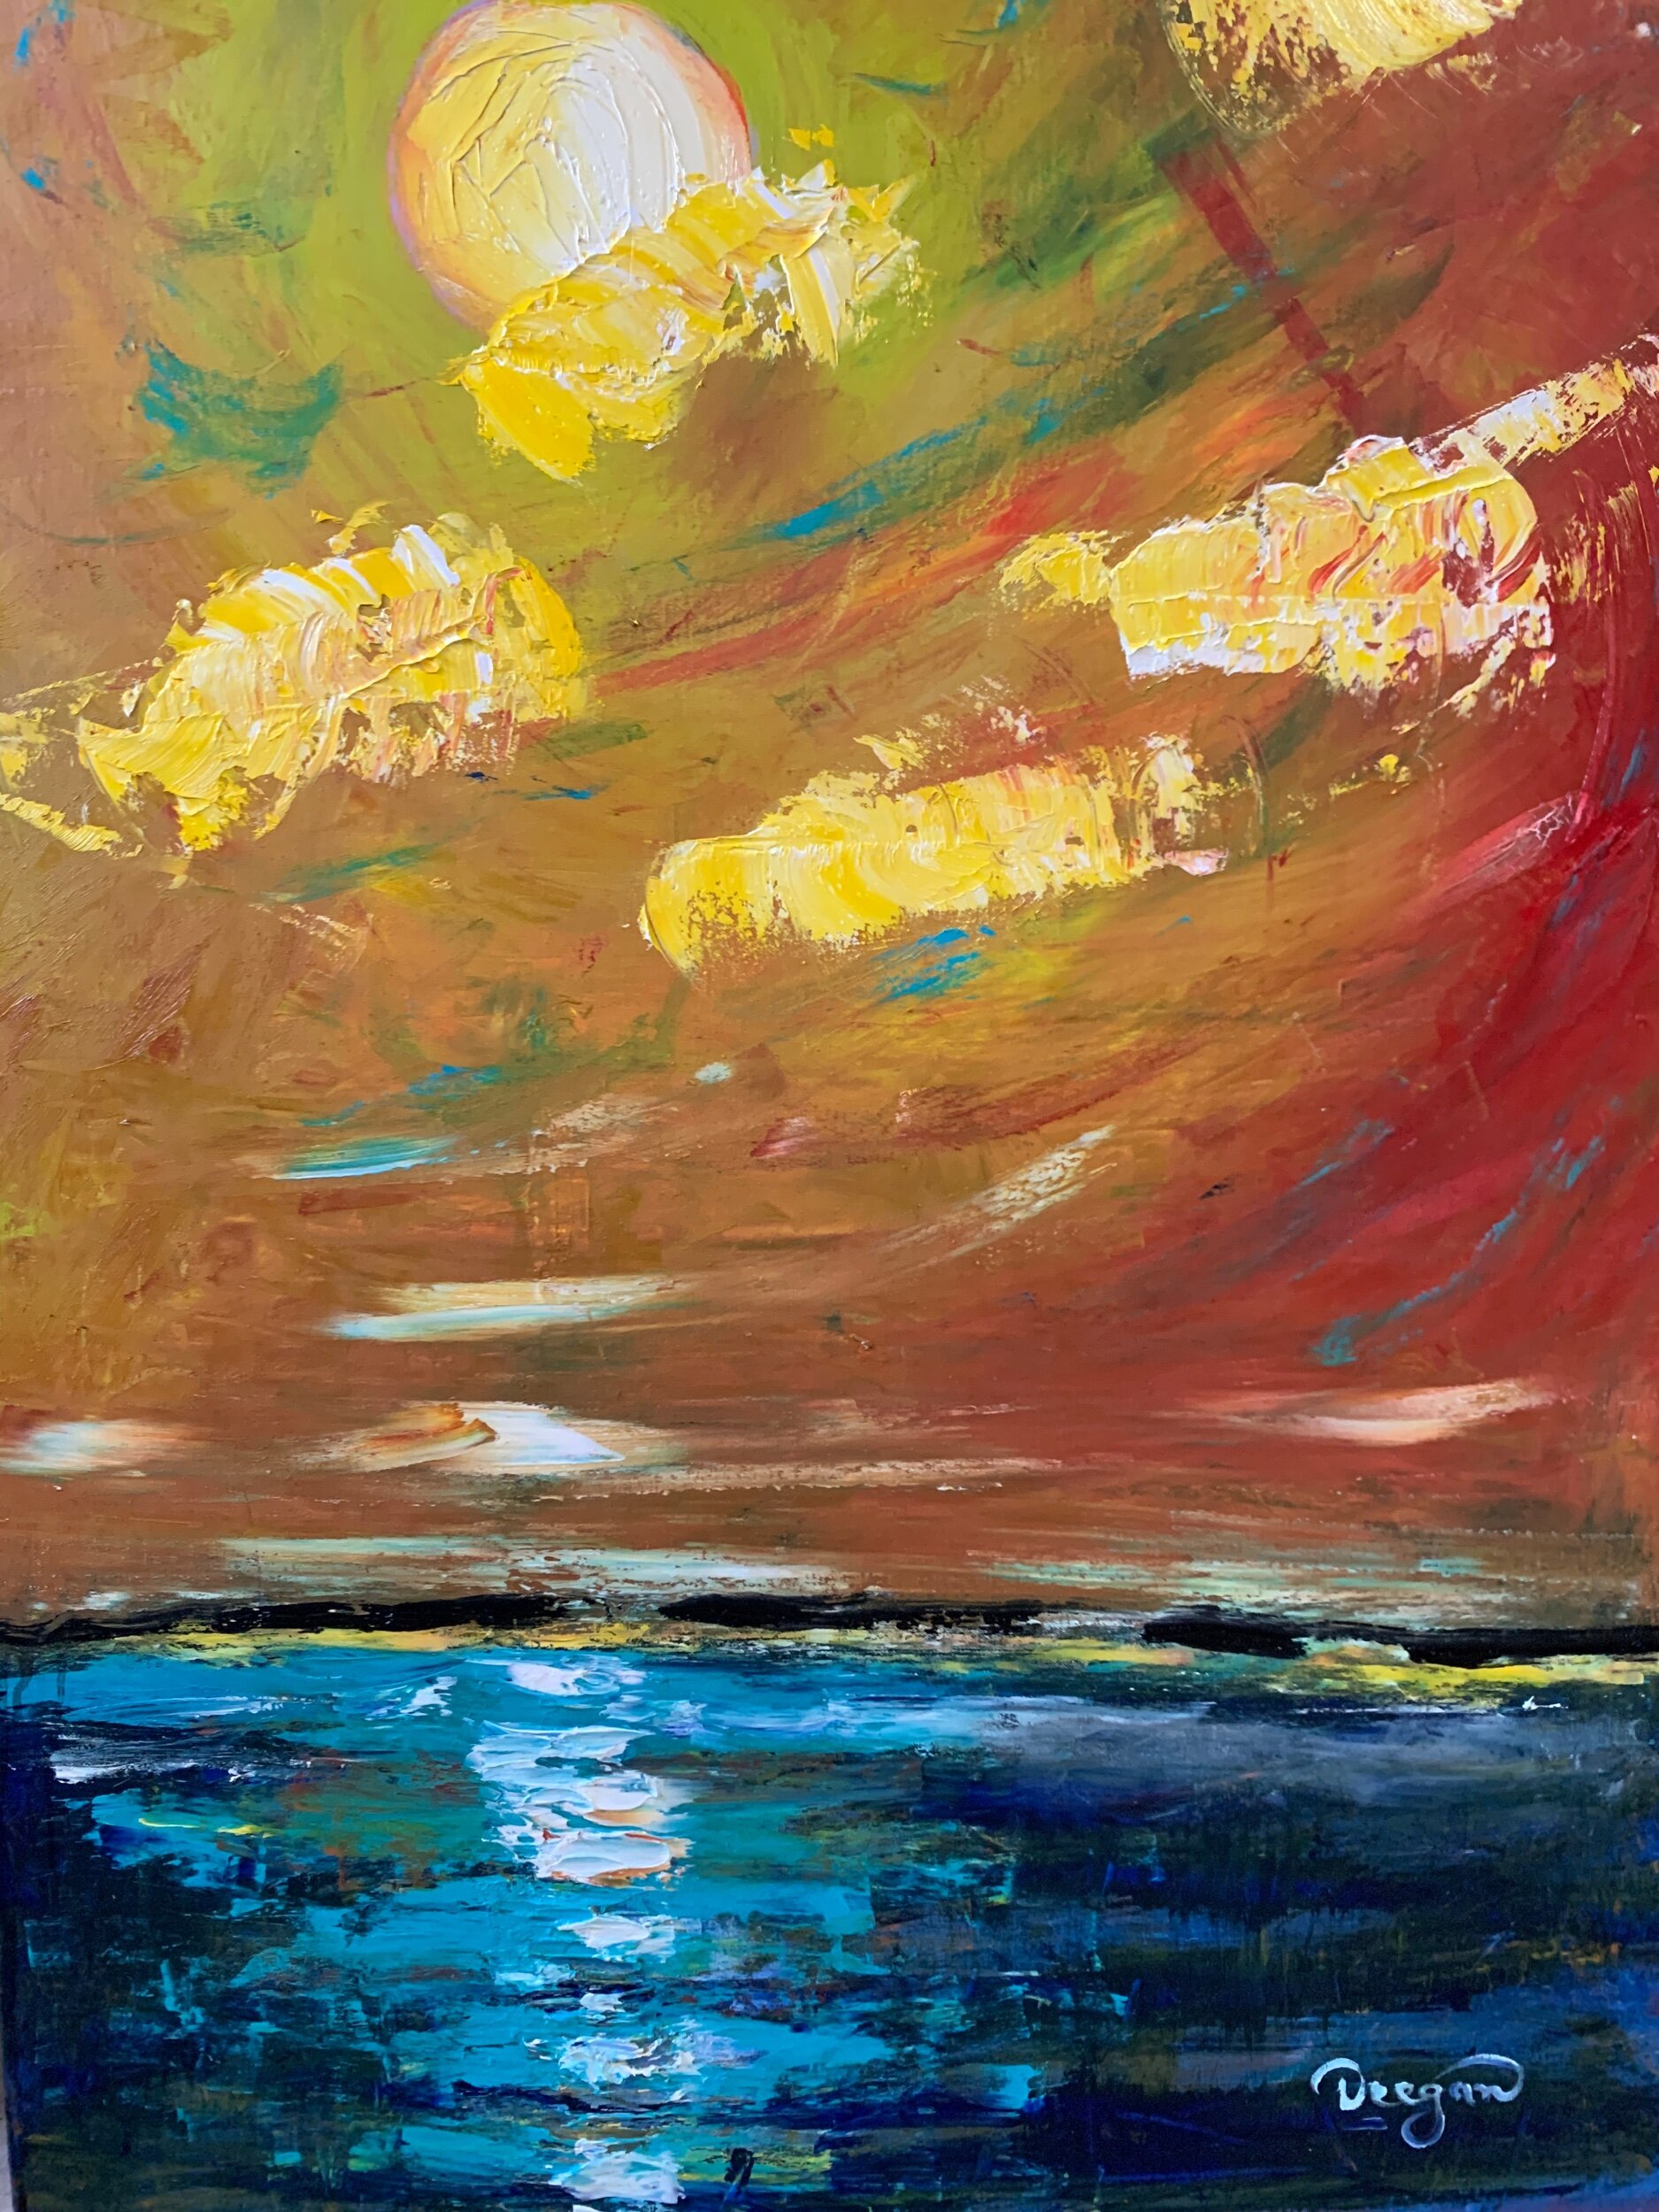 Sunset at Lake Livingston 30”x40” oil on canvas, 2021